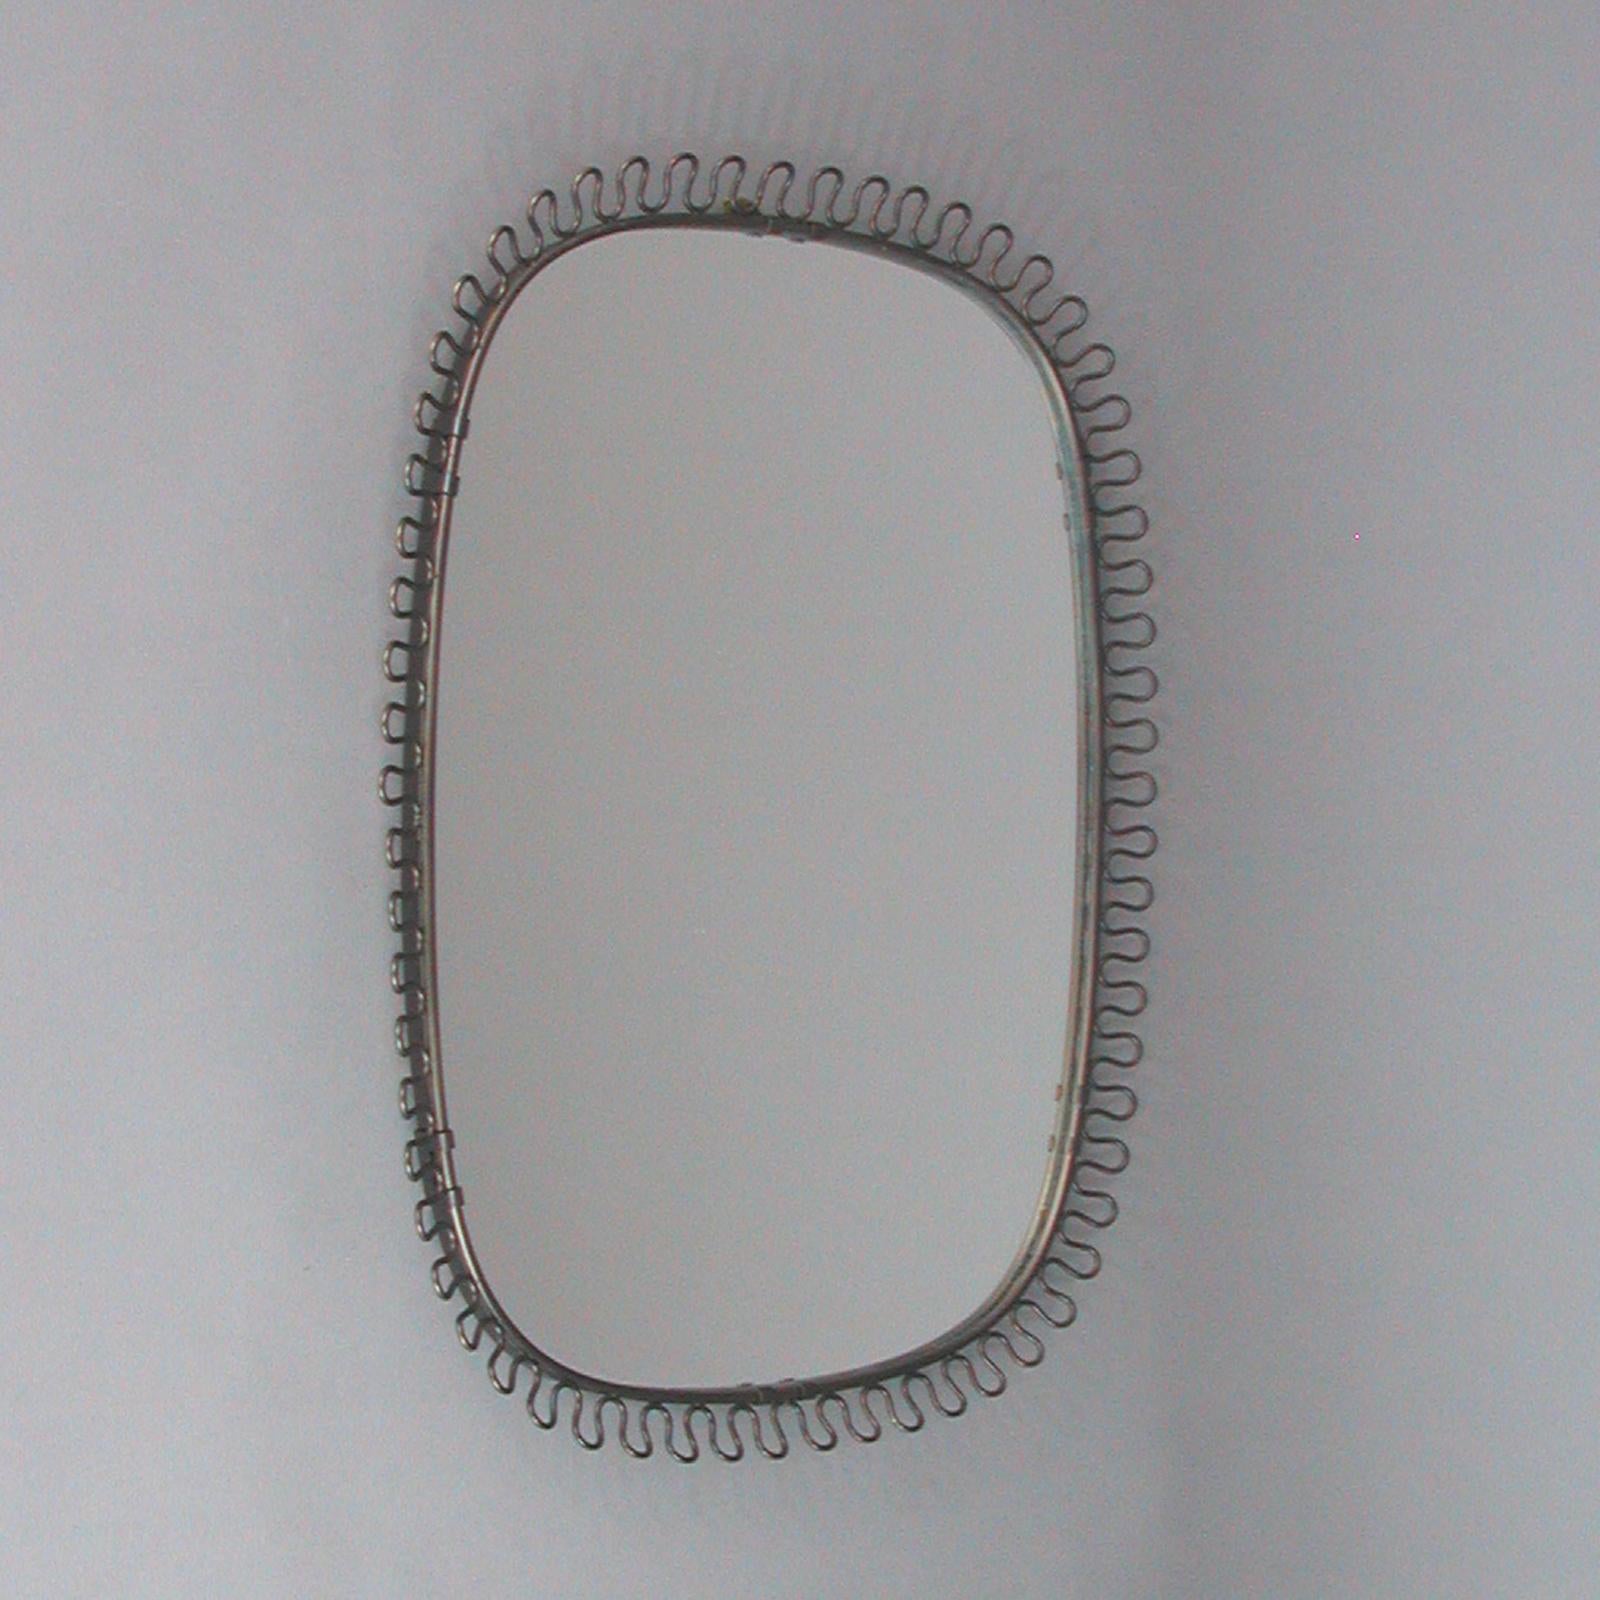 This beautiful sculptural loop wall mirror was designed in Sweden by Josef Frank for Svenskt Tenn in the 1950s. The bronzed frame with nice warm vintage patina. 

The original mirror glass flawless.
Size of mirror glass only: 16.5